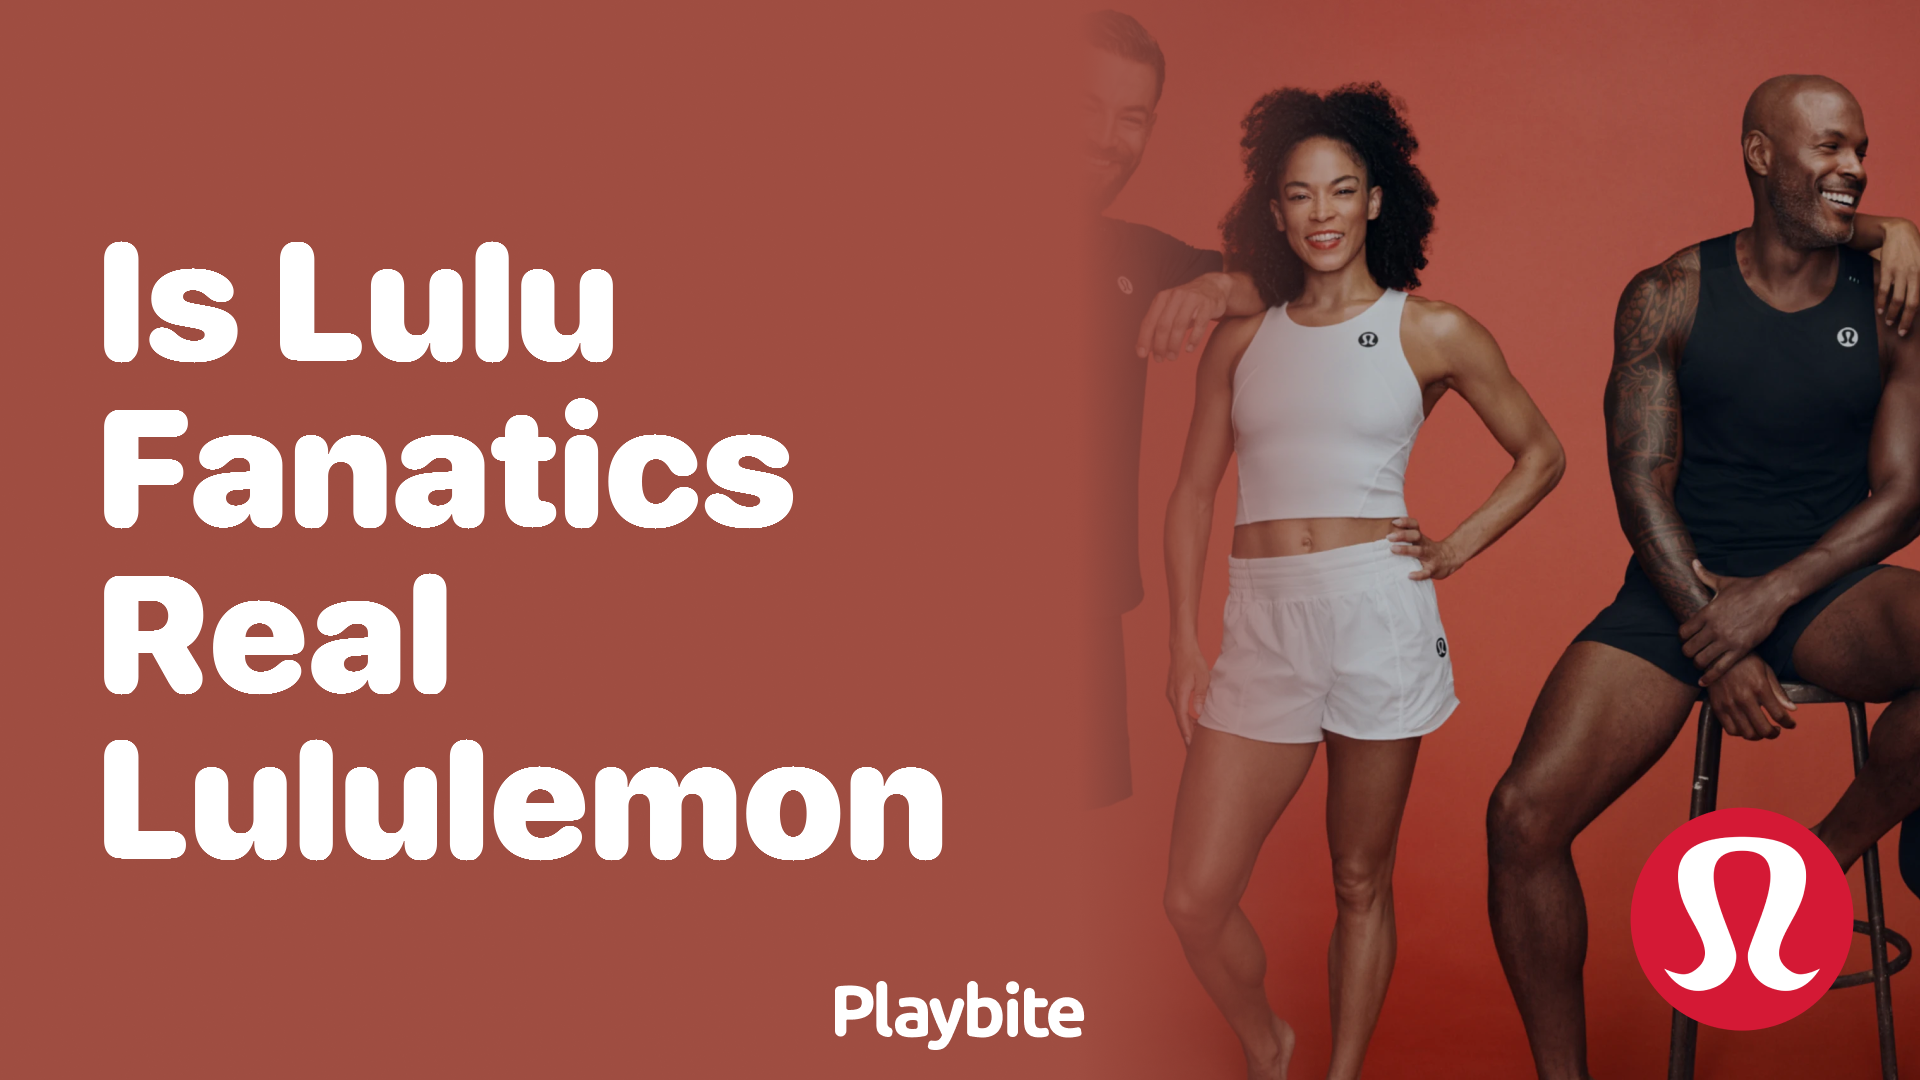 Is Lulu Fanatics Real Lululemon? Unwrapping the Truth - Playbite